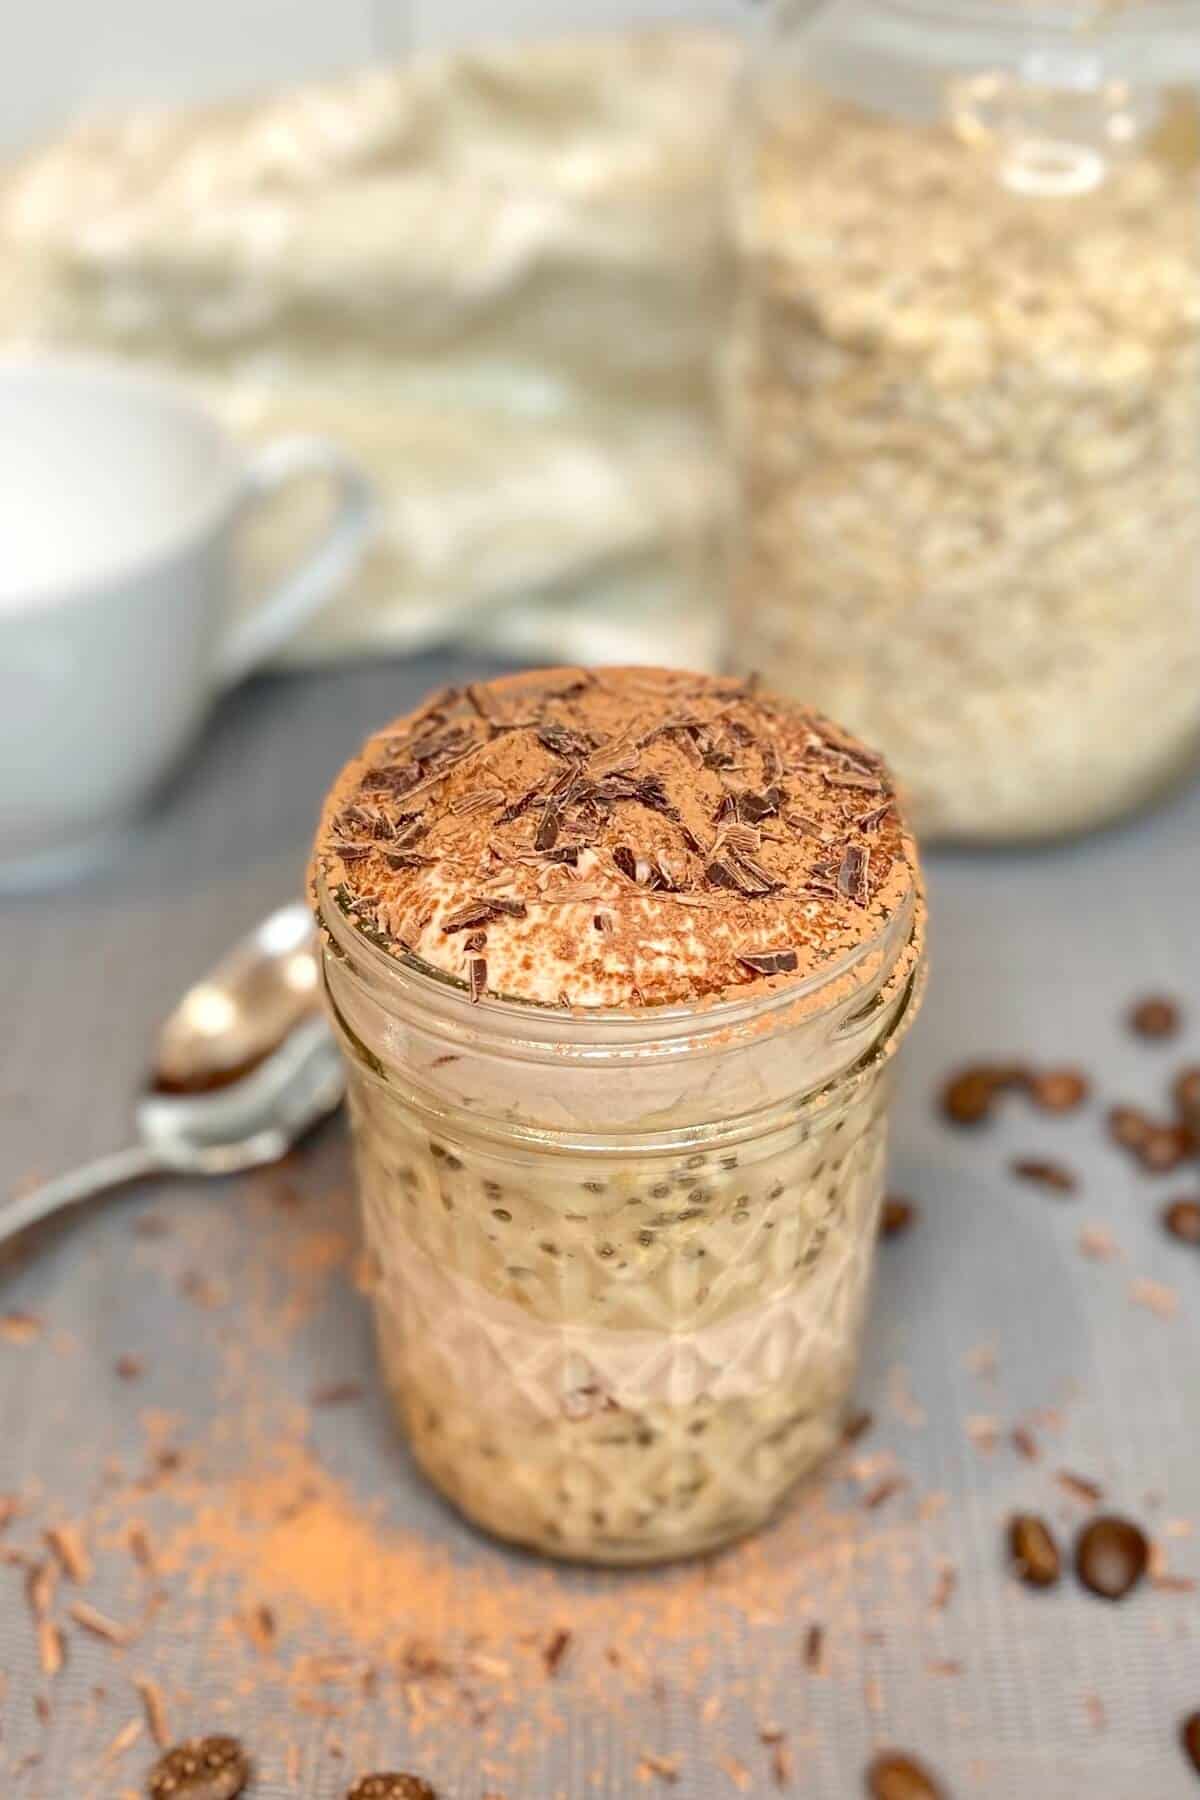 Tiramisu oats in a mason jar, sprinkled with cocoa and chocolate shavings on top.